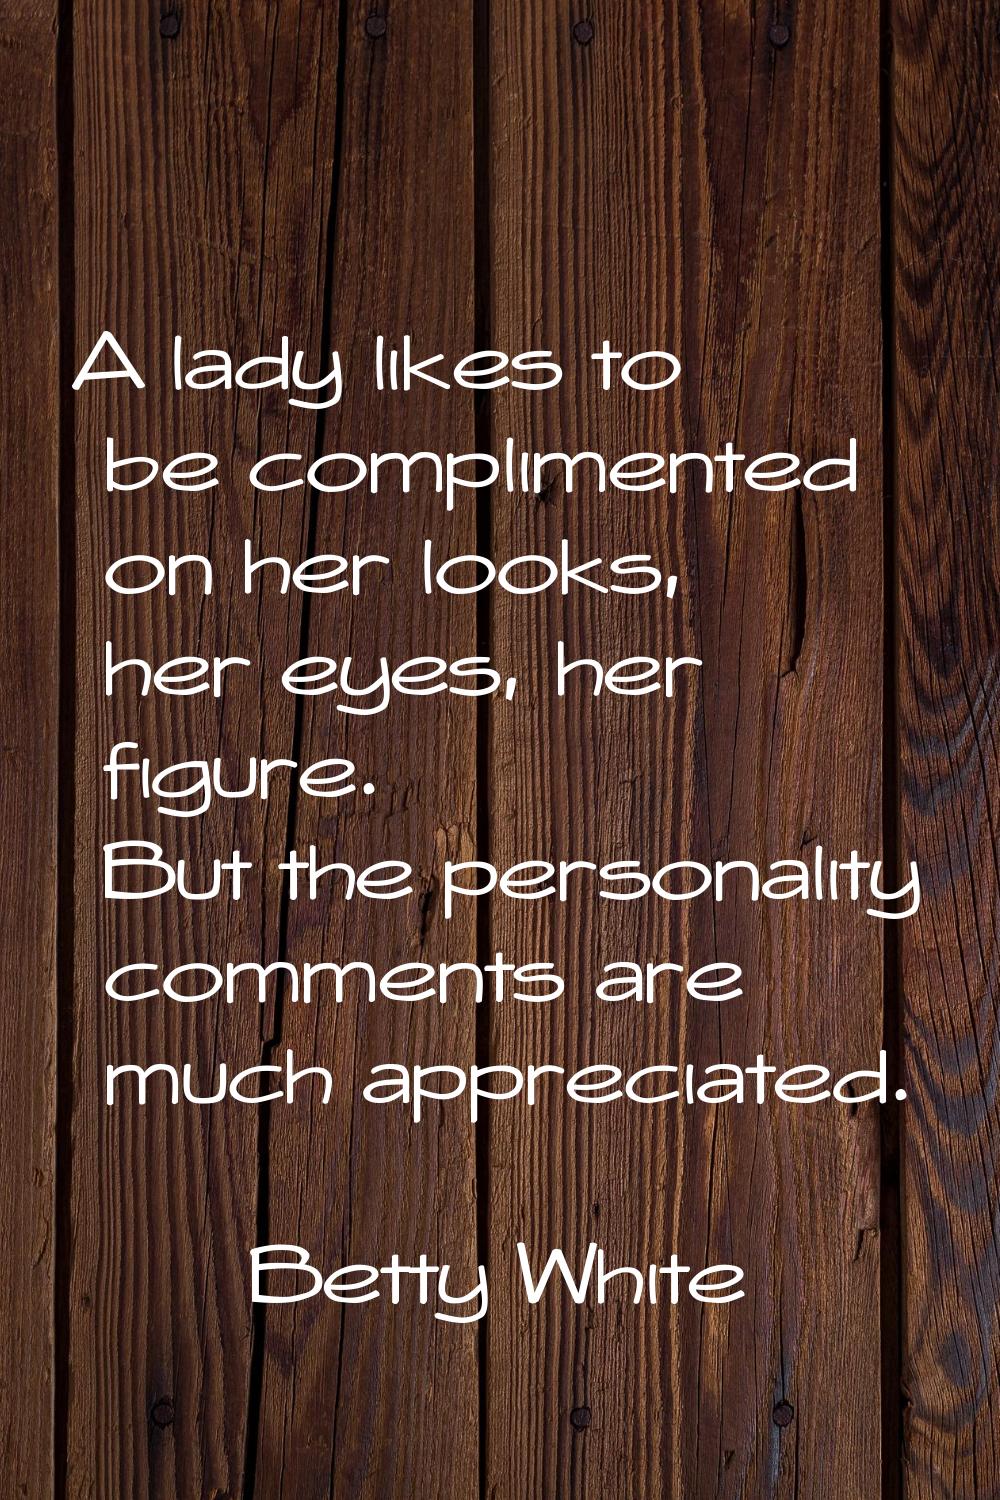 A lady likes to be complimented on her looks, her eyes, her figure. But the personality comments ar